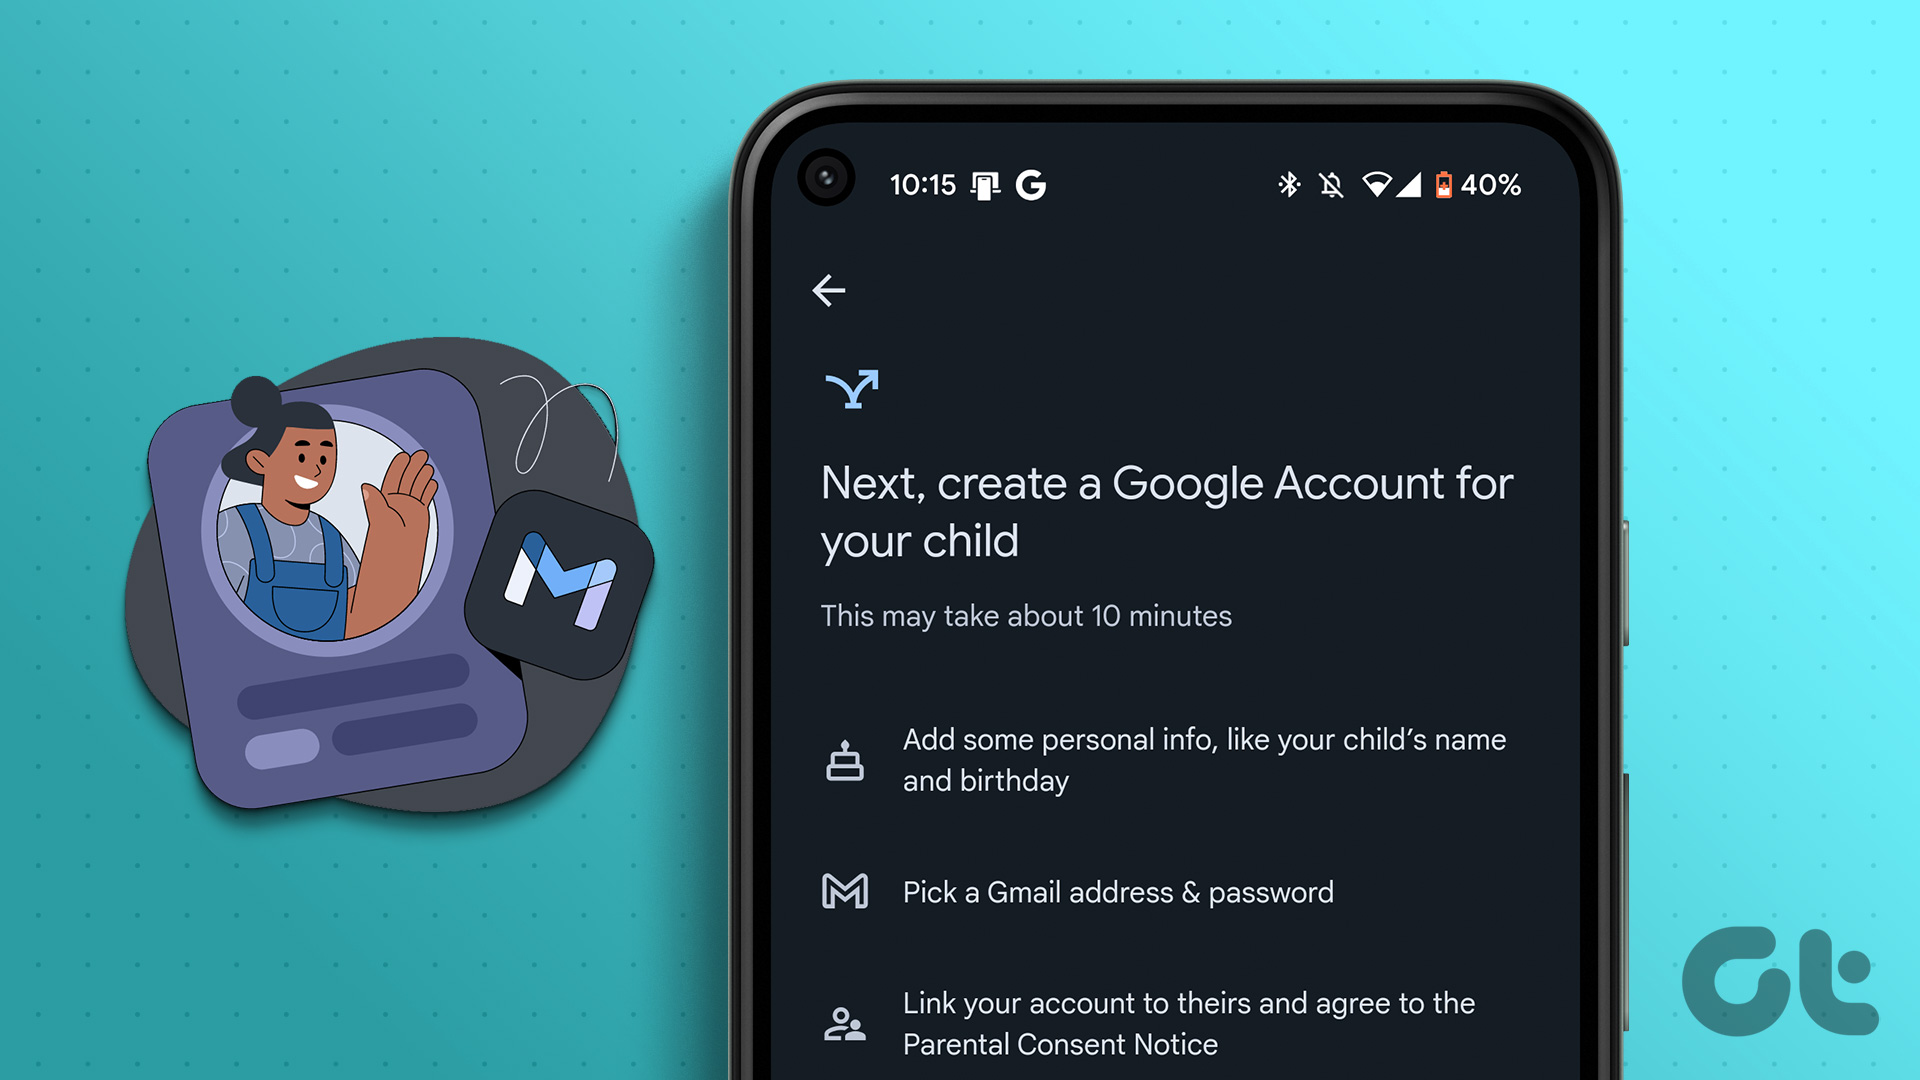 How to create a Google Account for Your Child